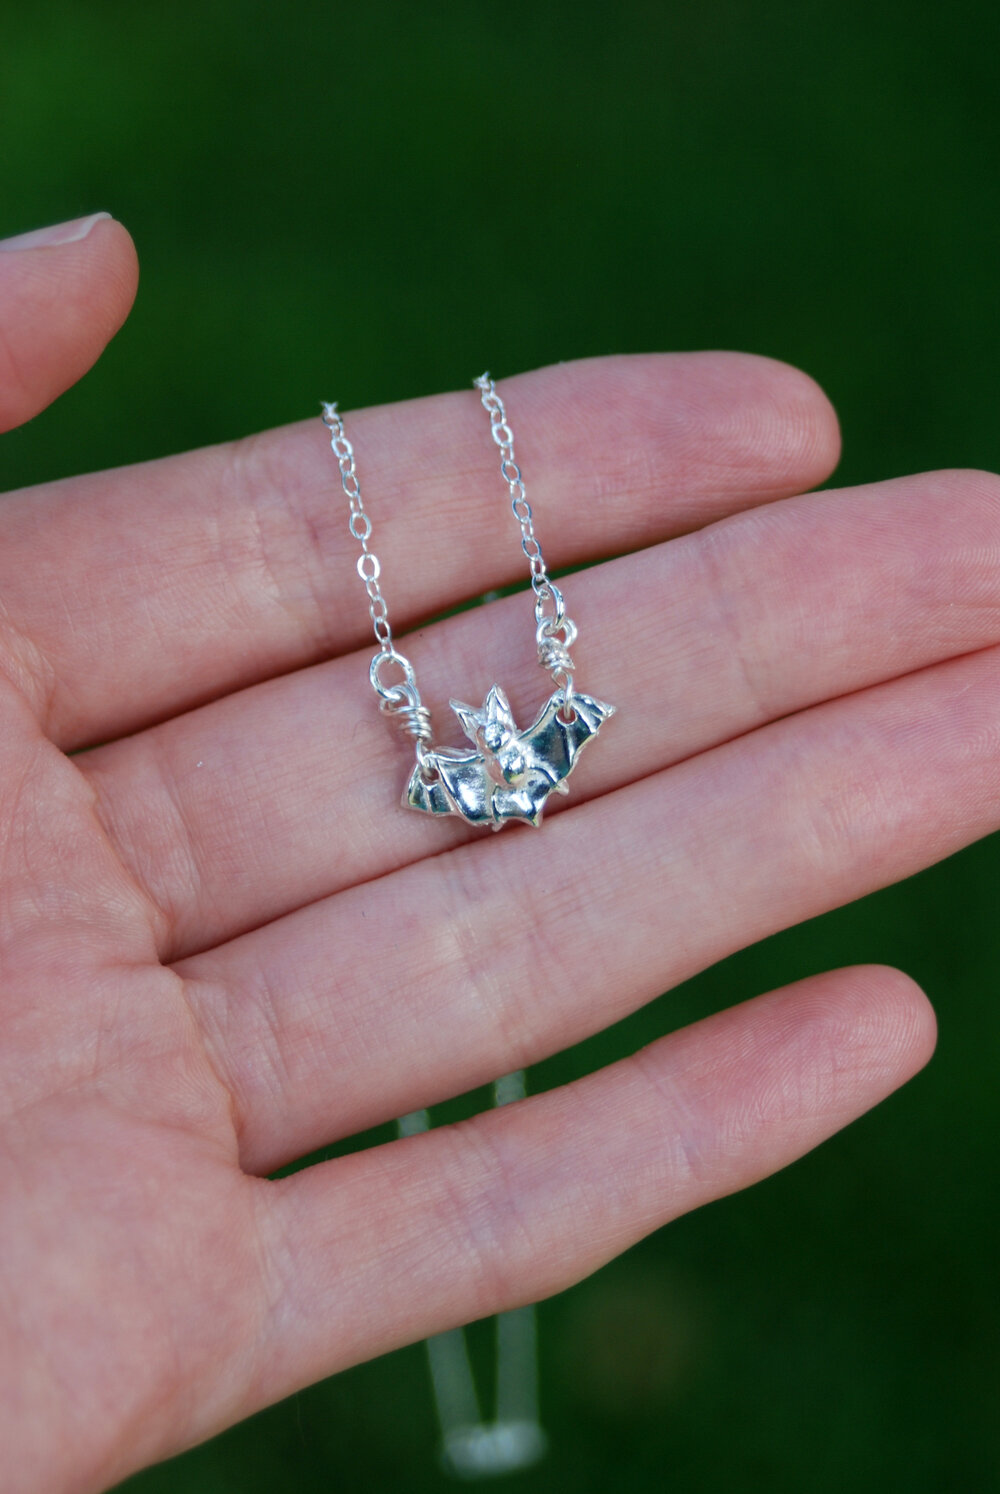 Tiny bat necklace in silver